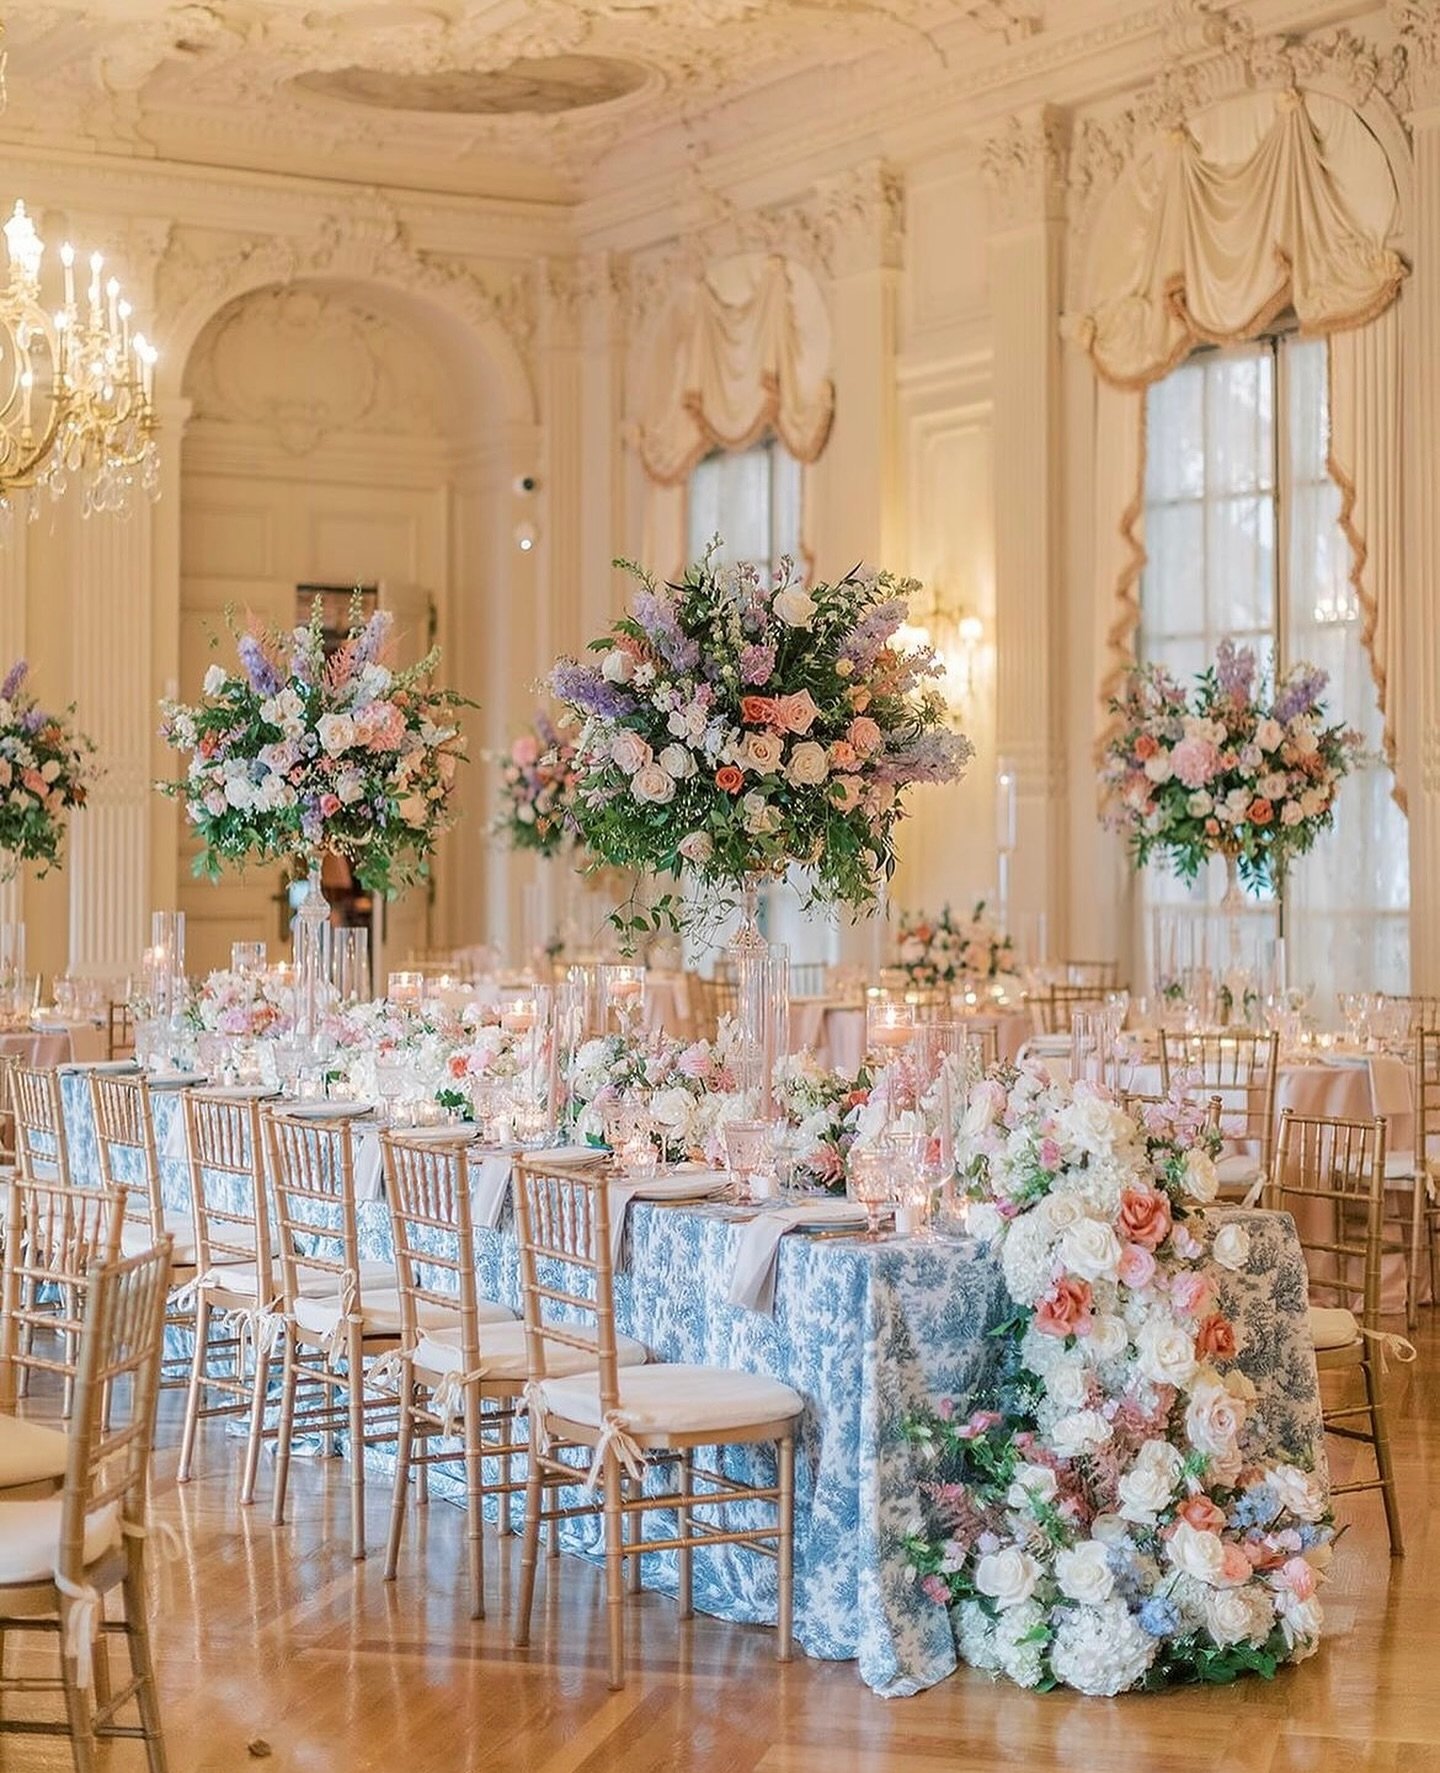 We love the grandeur of a wedding at Rosecliff mansion, where every table is adorned with stunning blooms. For this wedding, shades of pink and lavender florals complemented the elegant charm of vibrant blue and white linens. It was a scene straight 